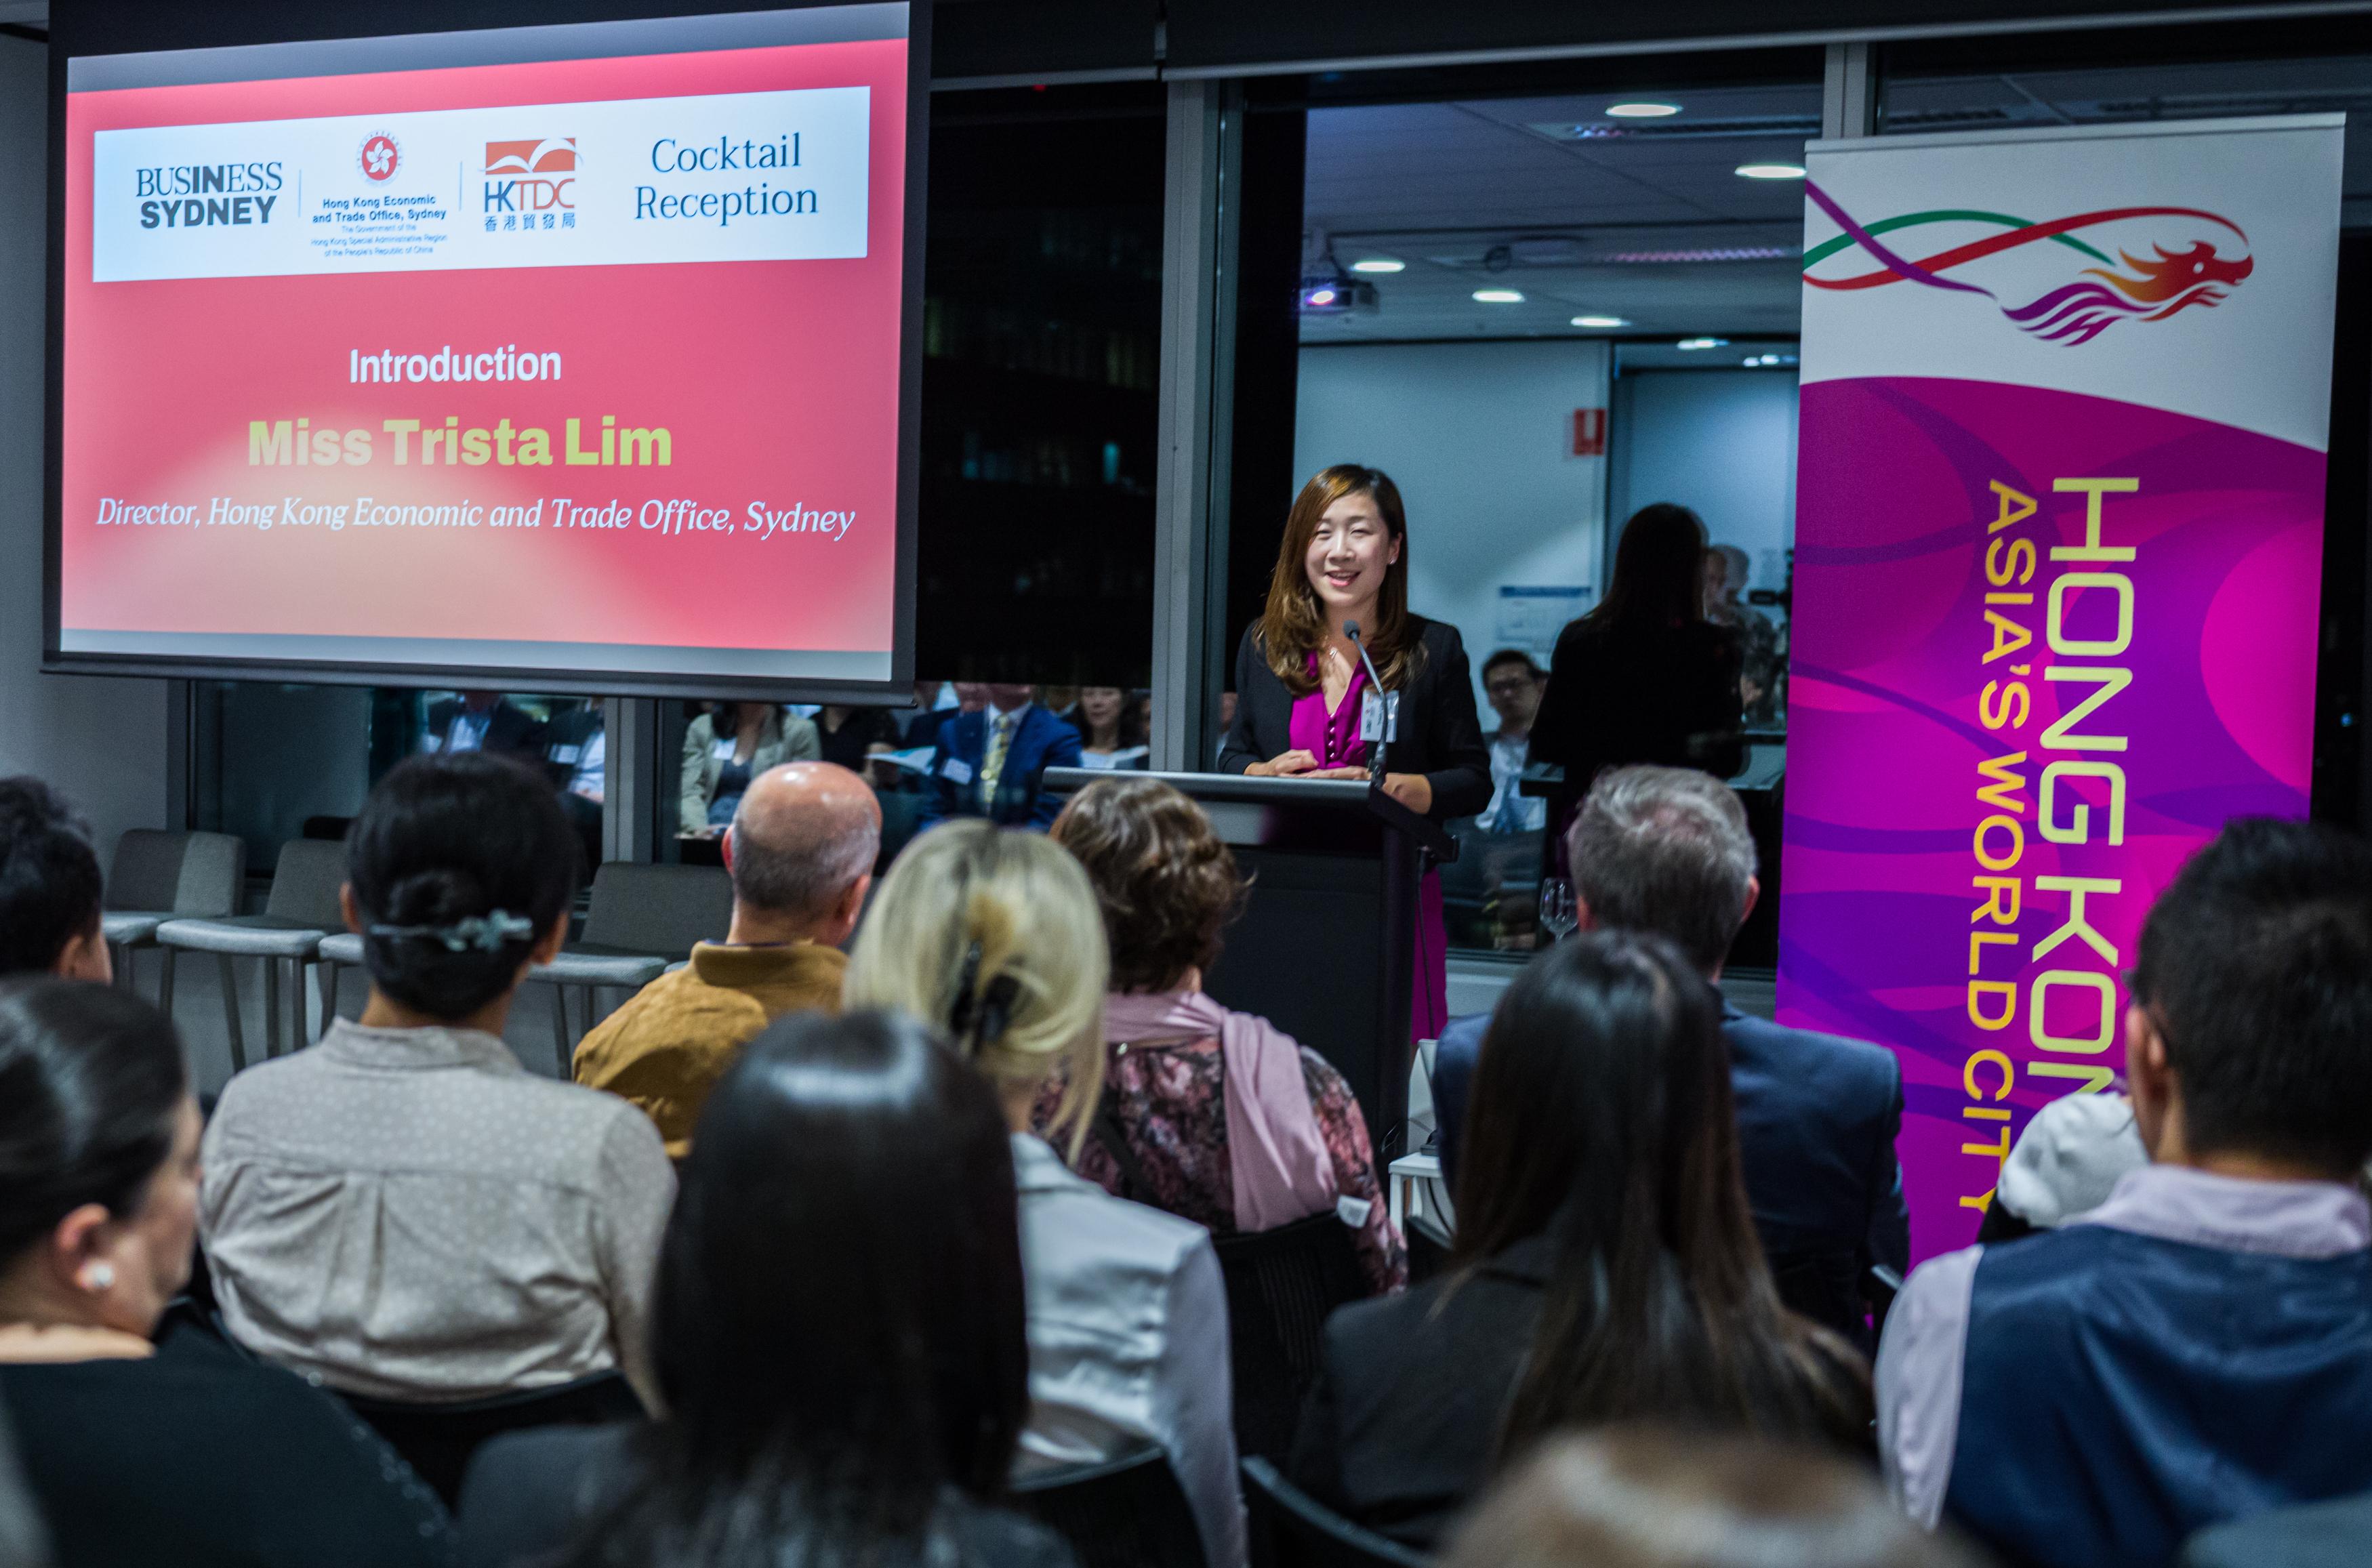 The Director of the Hong Kong Economic and Trade Office, Sydney, Miss Trista Lim, delivered welcoming remarks at a business seminar held in Sydney, Australia today (April 27) to promote the upcoming Asia Summit on Global Health and a series of international events to be held in Hong Kong.  Miss Lim encouraged the participants to visit Hong Kong.